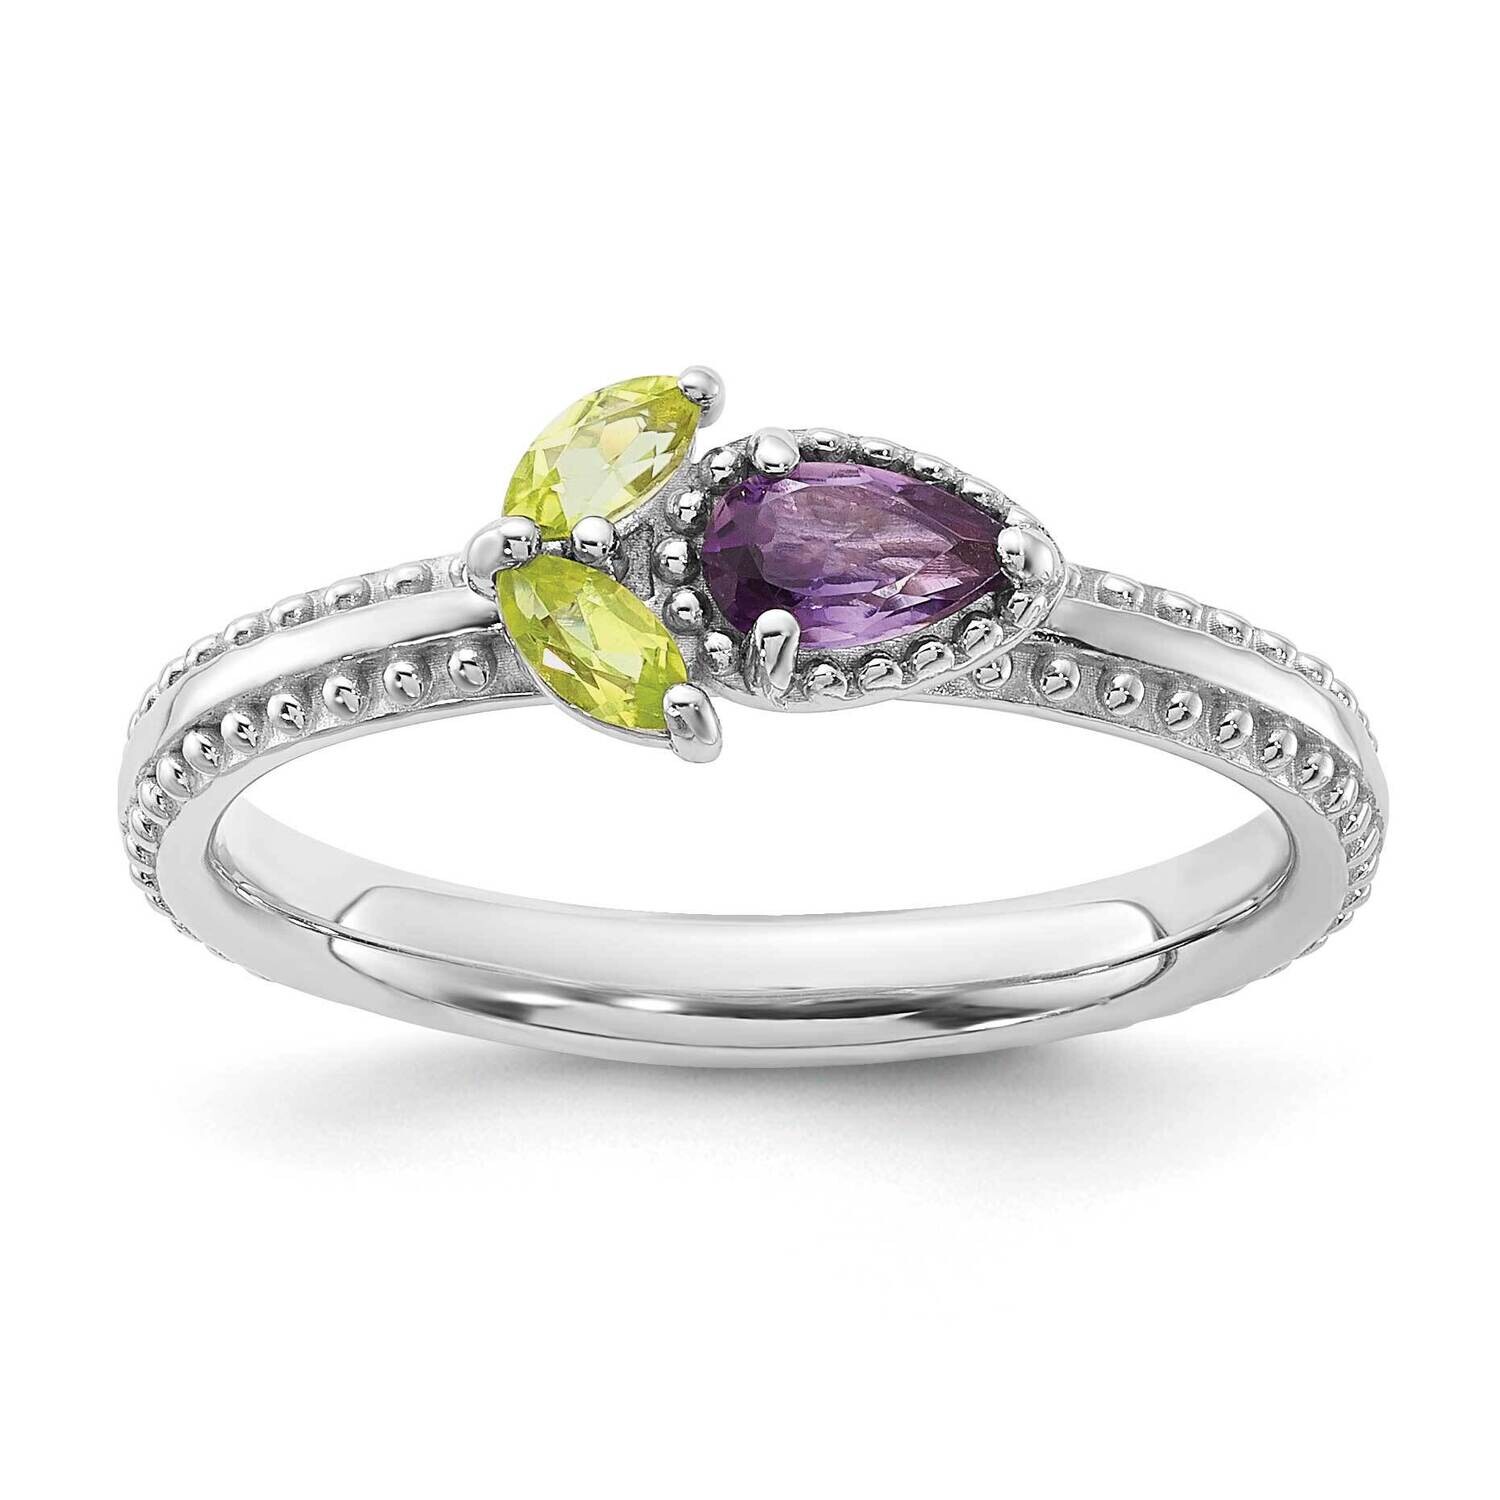 Stackable Expressions Rhodium-Plated Textured Amethyst Peridot Flower Ring Sterling Silver QSK2241